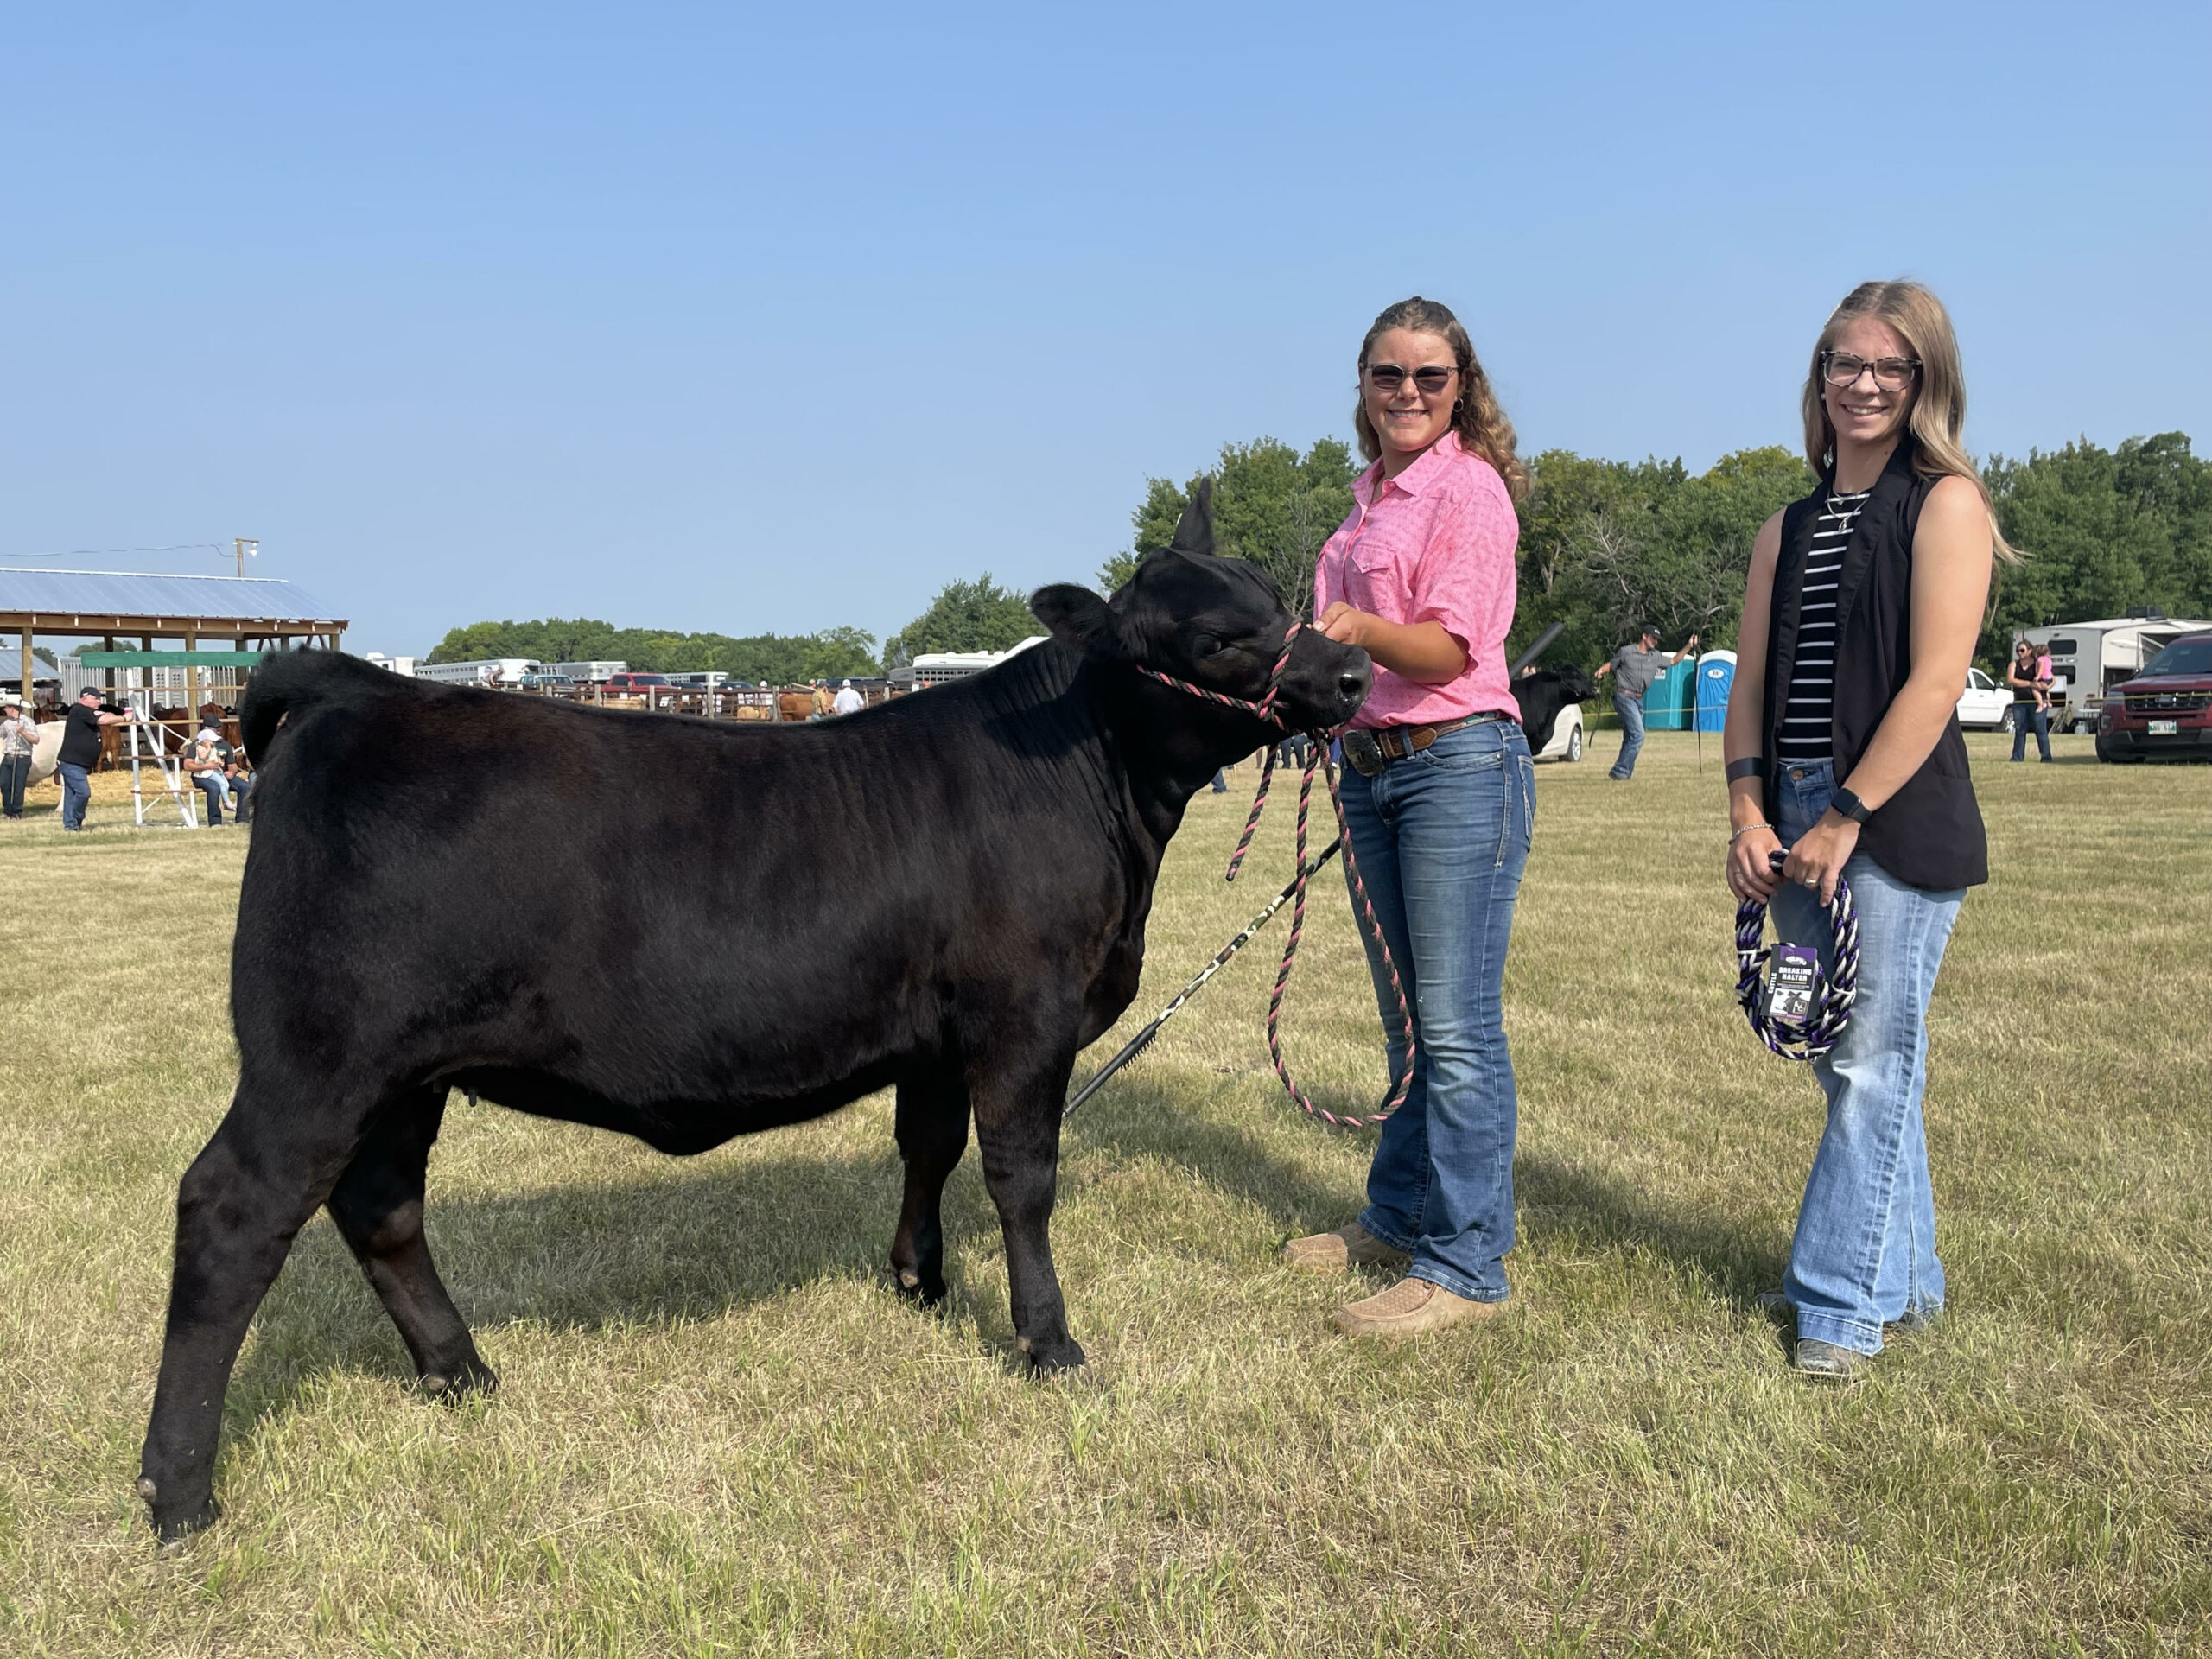 MJAA 2023 Summer Gold Show Reserve Grand Champion Female - KCH Rose 312 exhibited by Kendra Hinsburg, Rapid City, MB